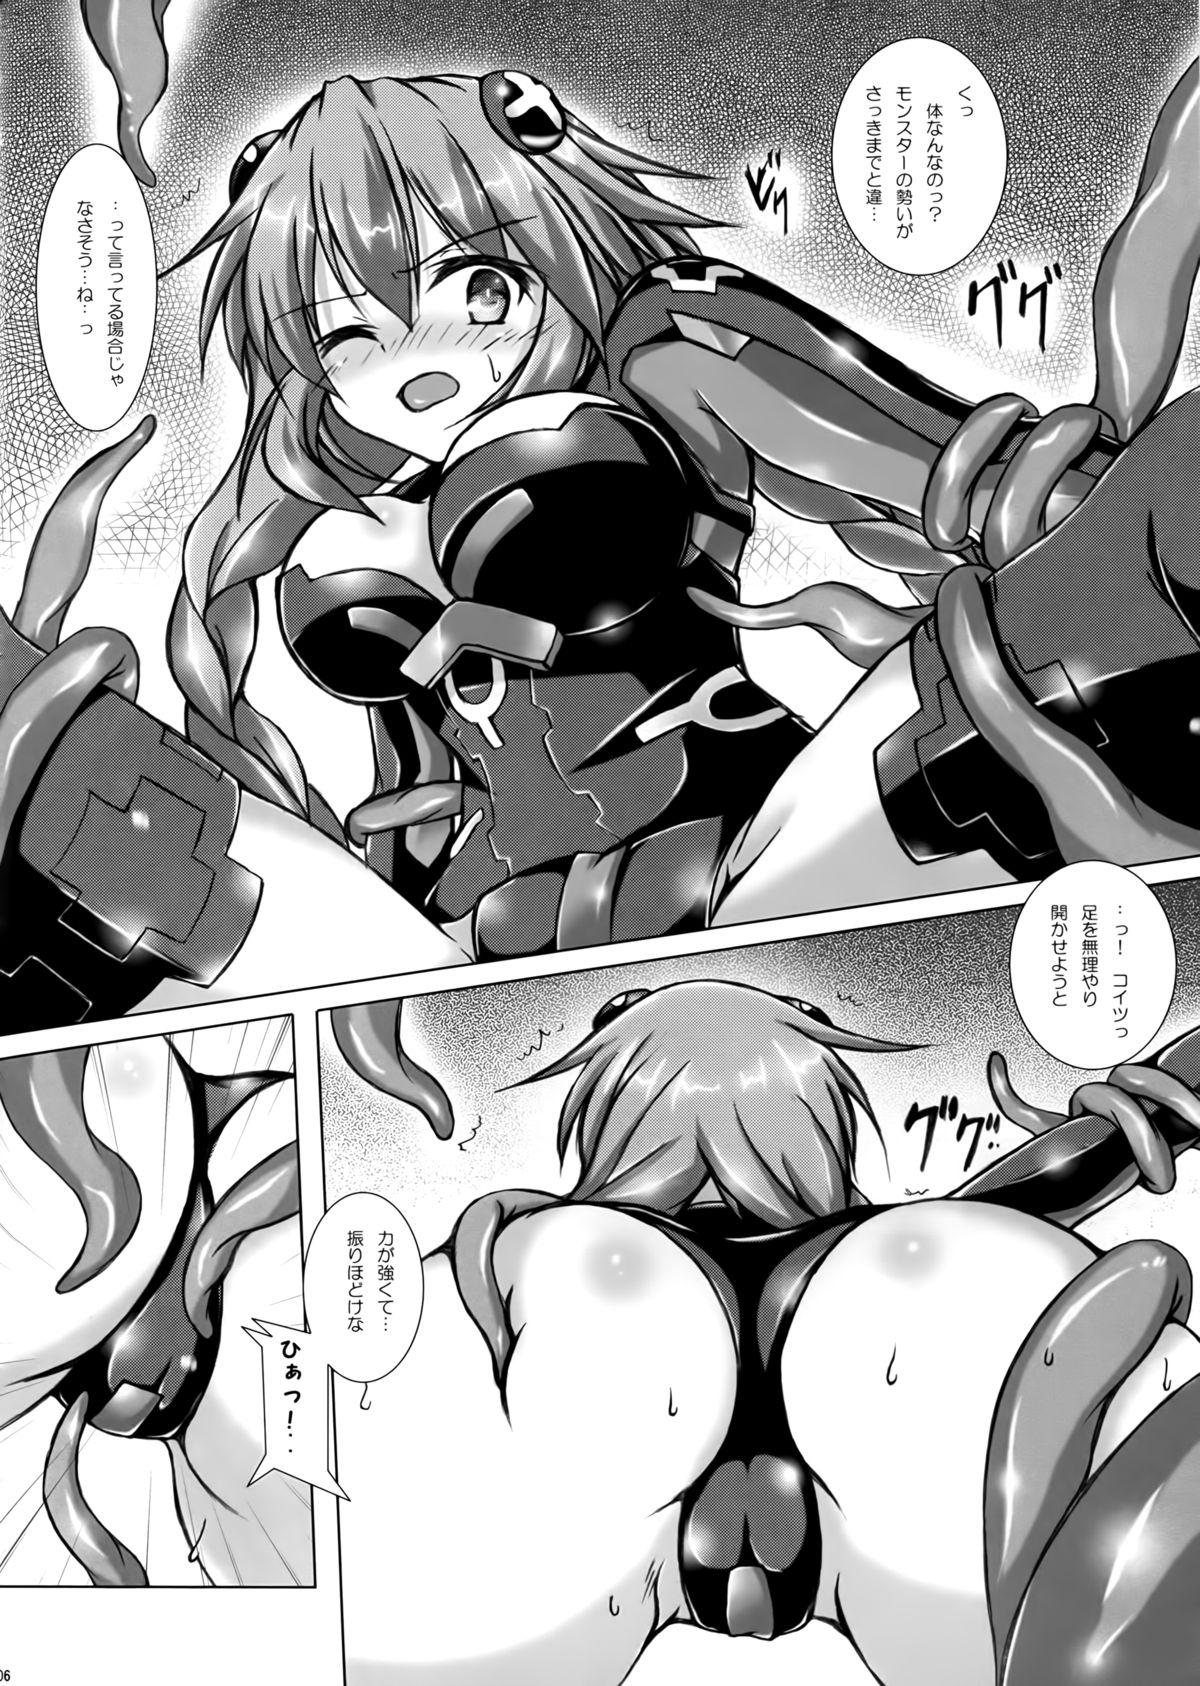 Fetish Tentacle Syndrome - Hyperdimension neptunia Colombiana - Page 6